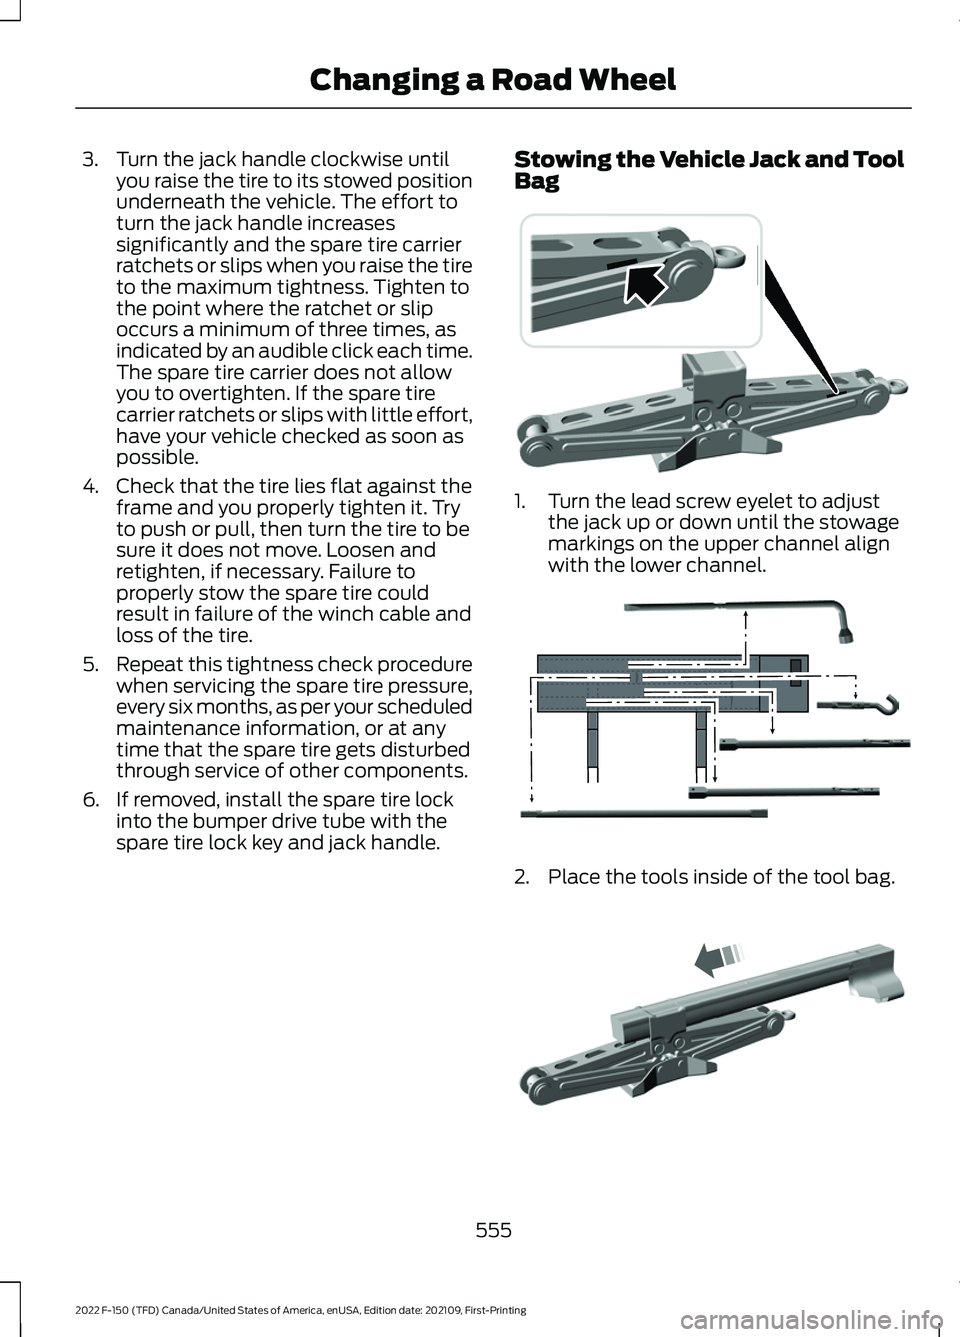 FORD F-150 2022  Owners Manual 3. Turn the jack handle clockwise until
you raise the tire to its stowed position
underneath the vehicle. The effort to
turn the jack handle increases
significantly and the spare tire carrier
ratchets